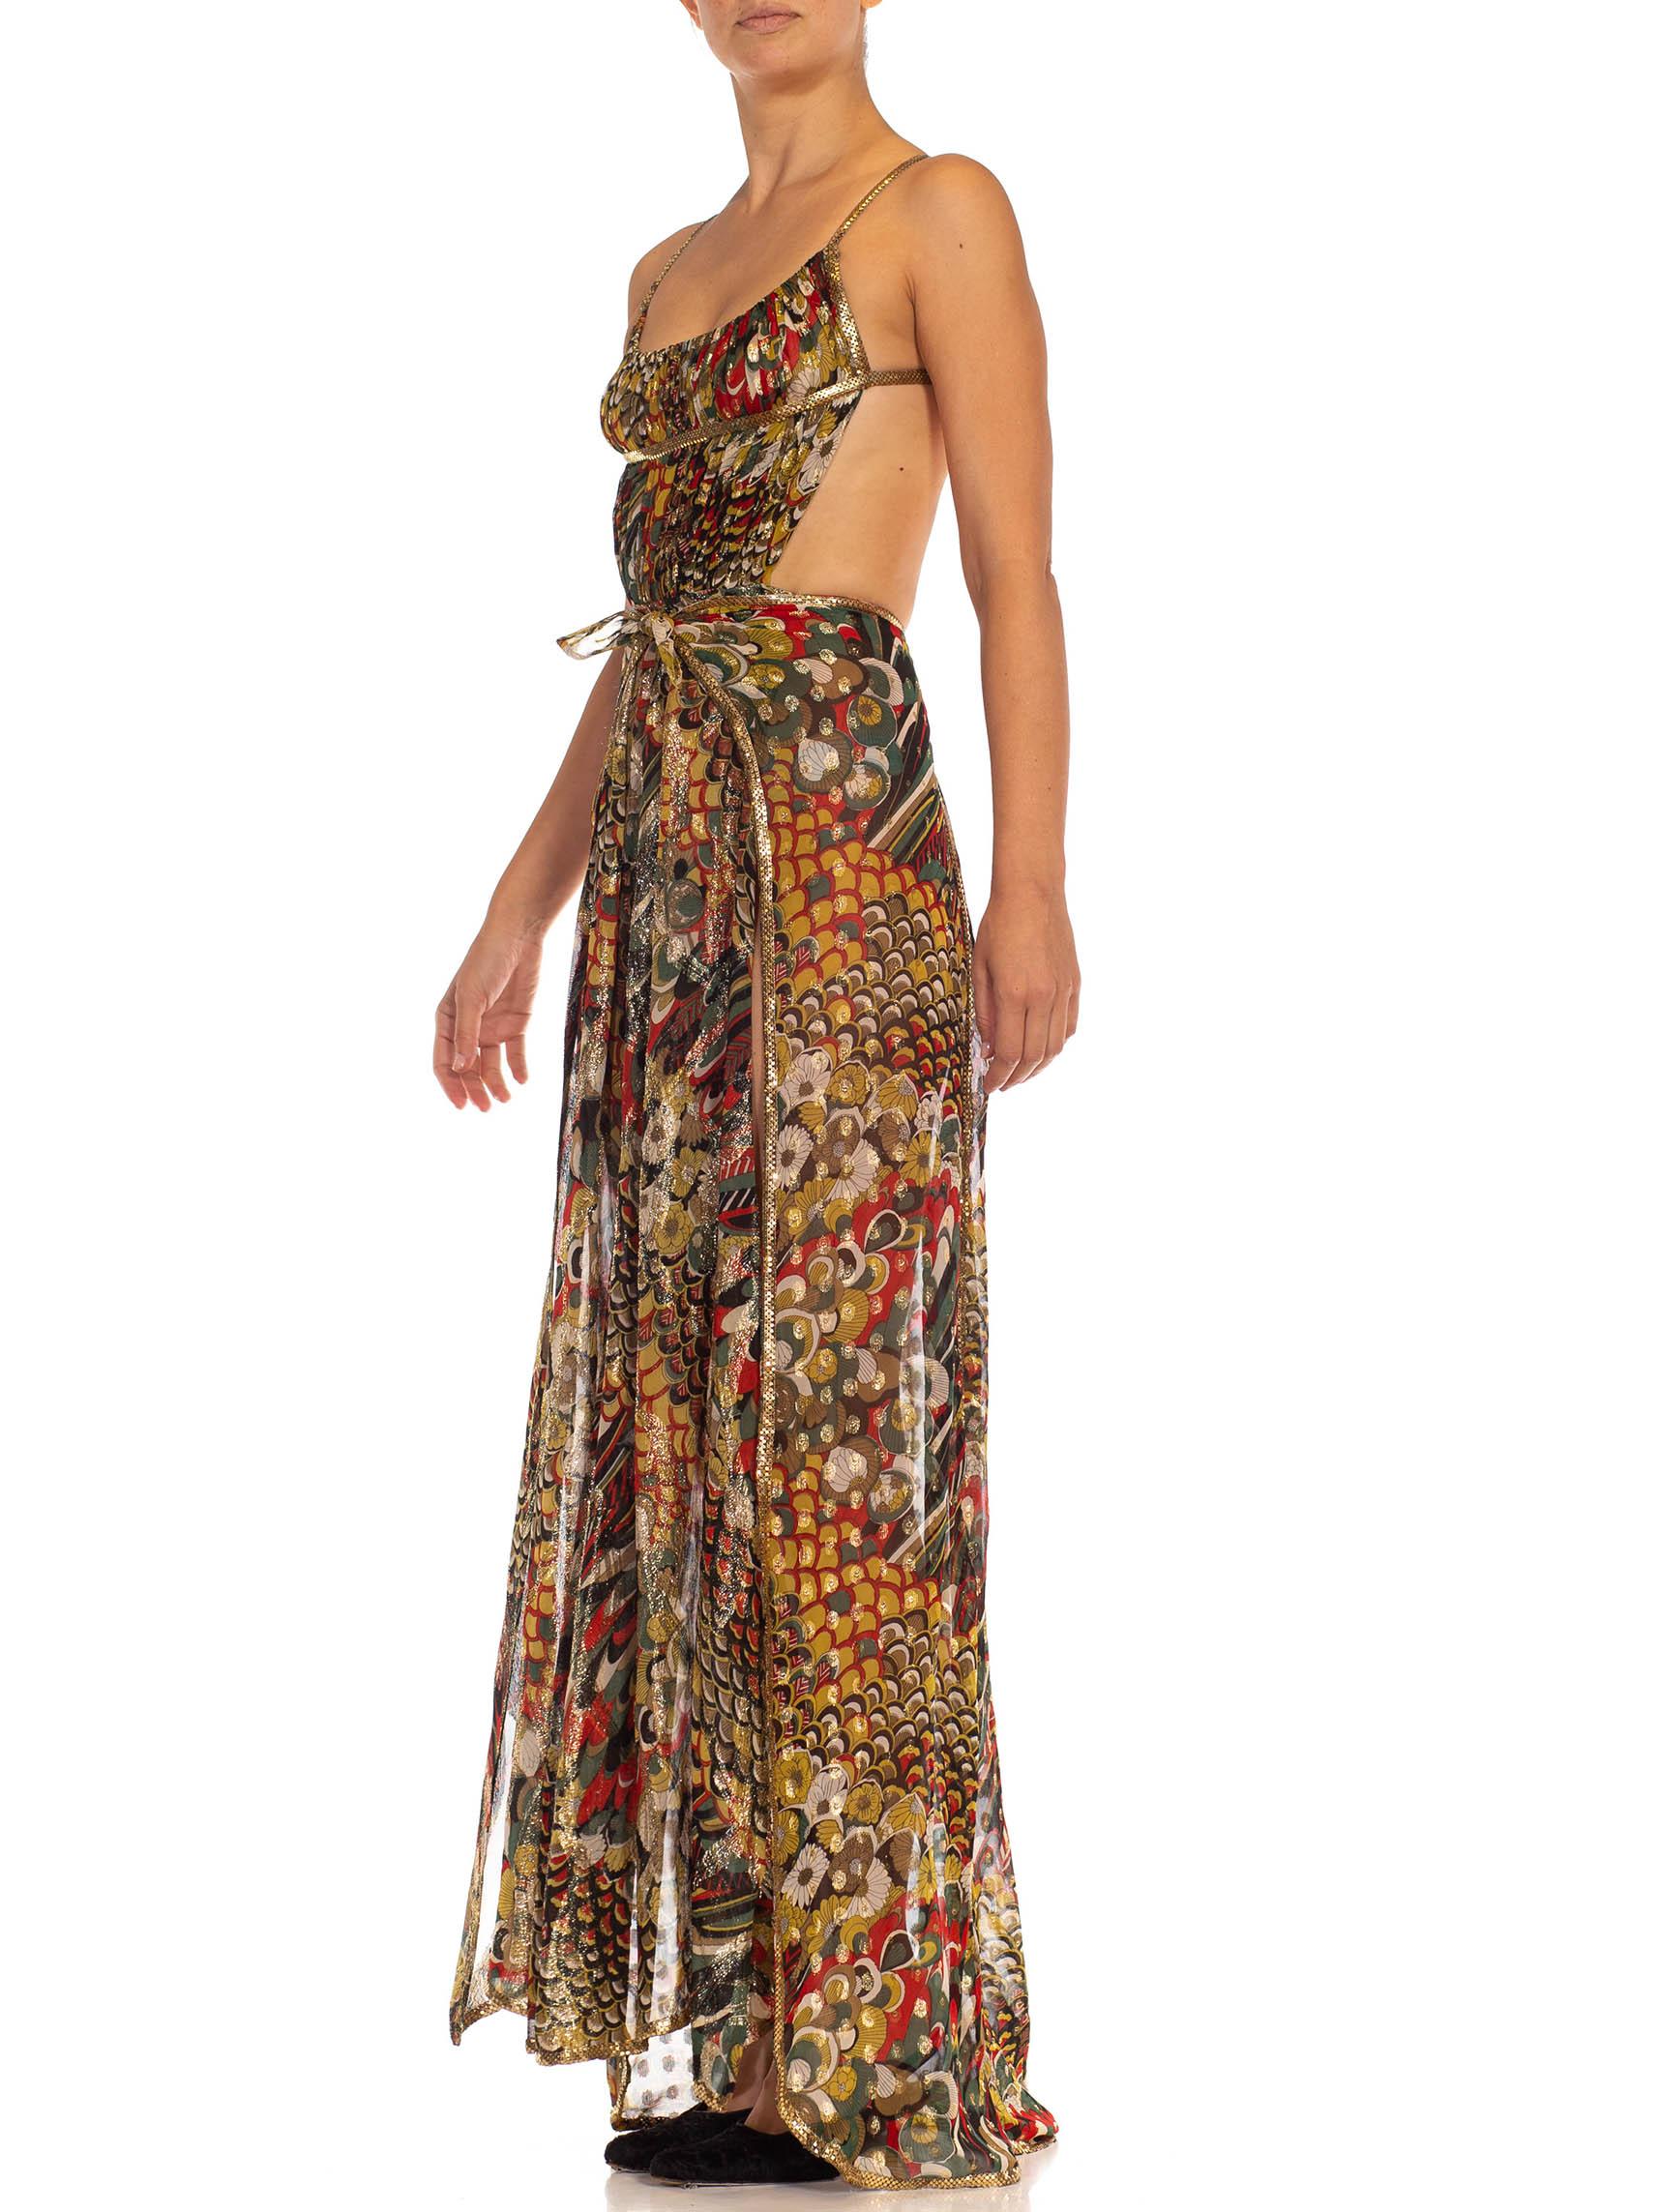 Brown Morphew Collection Green, Red & Gold Lamé Silk Chiffon Dress With Metal Mesh